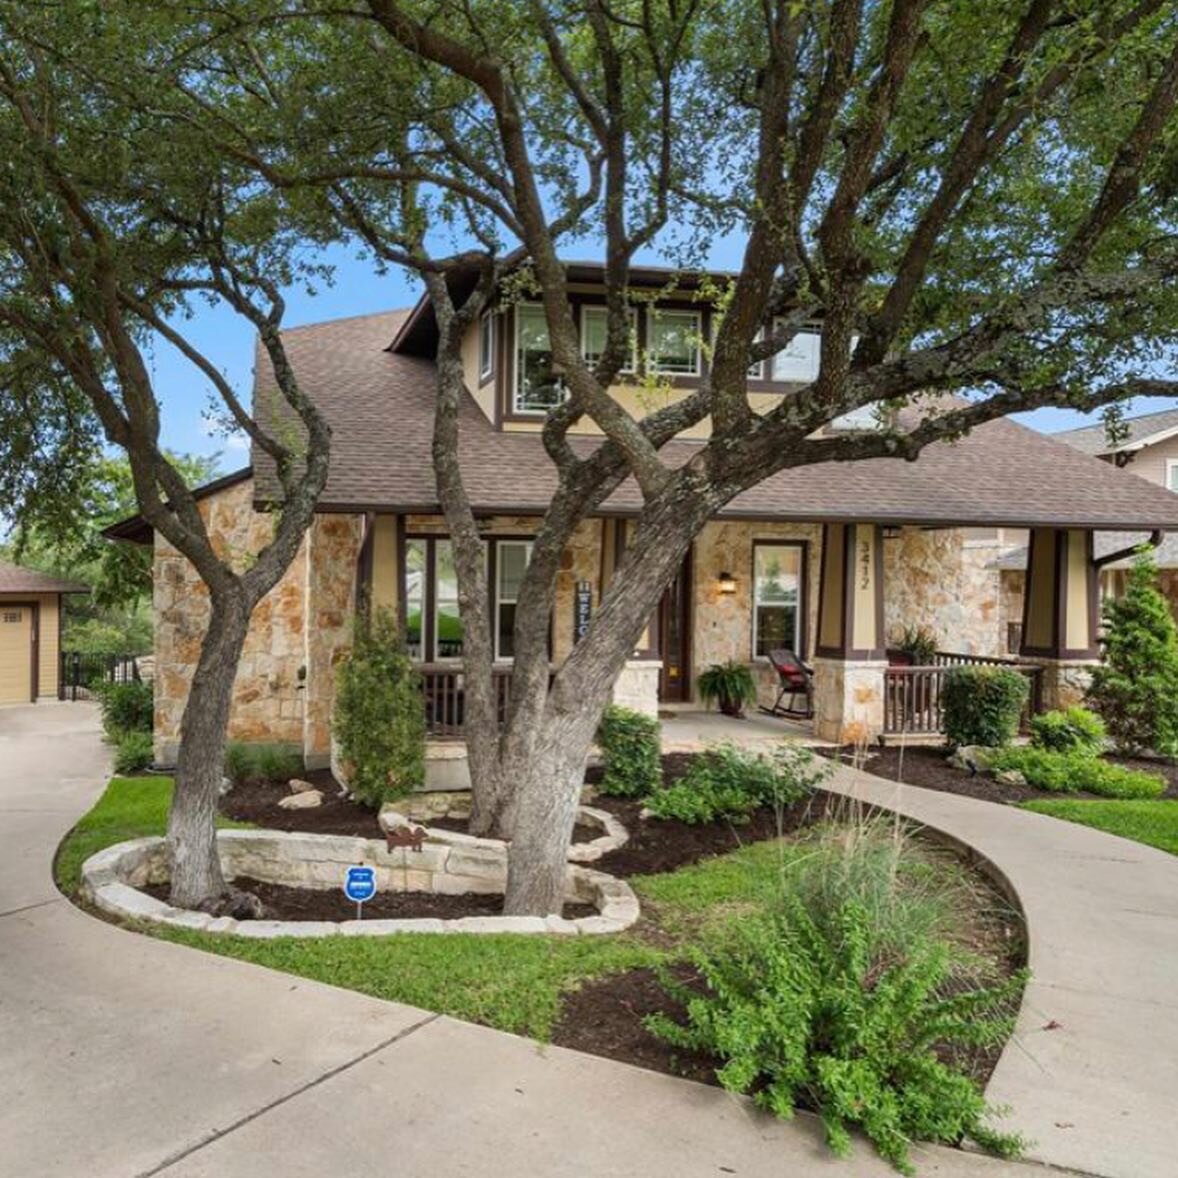 ✨SOLD✨
𝐁𝐮𝐲𝐞𝐫 𝐑𝐞𝐩𝐫𝐞𝐬𝐞𝐧𝐭𝐞𝐝
Overlooking Twin Creeks Golf Course in Cedar Park, Texas, this stunning property is a dream come true! 🏌️&zwj;♂️ With a pool, cabana, three car garage and breathtaking views of the #texas hill country, it's t